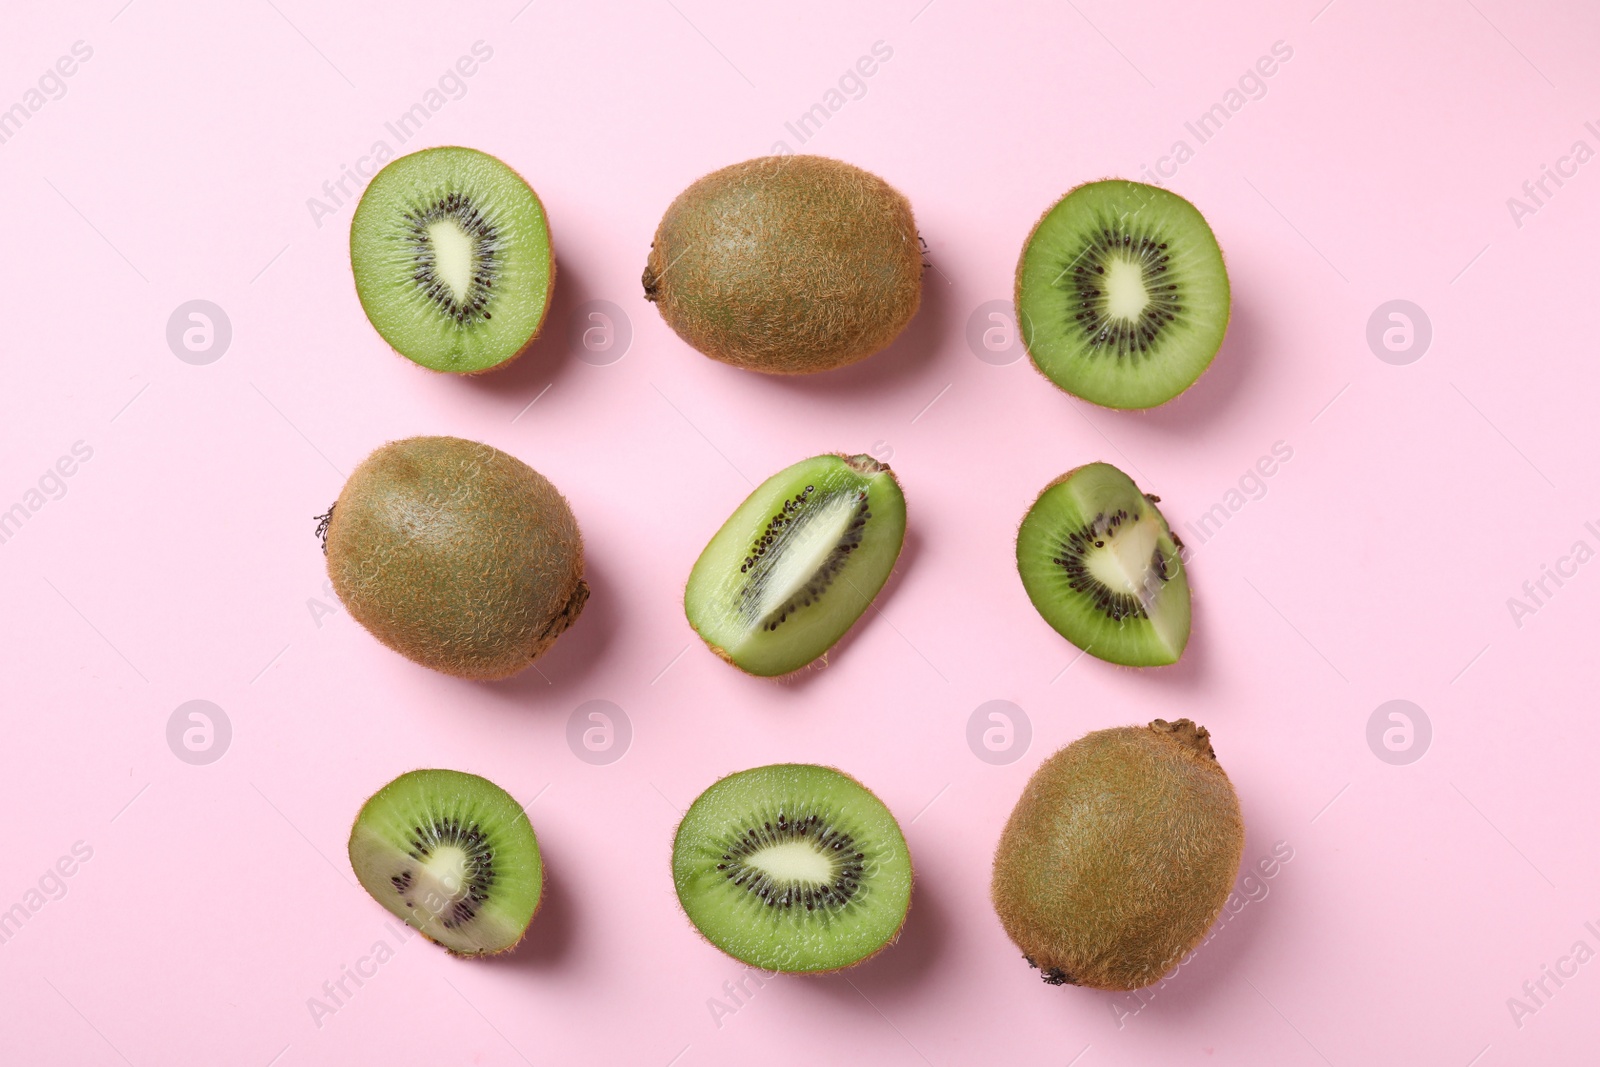 Photo of Top view of cut and whole fresh kiwis on pink background